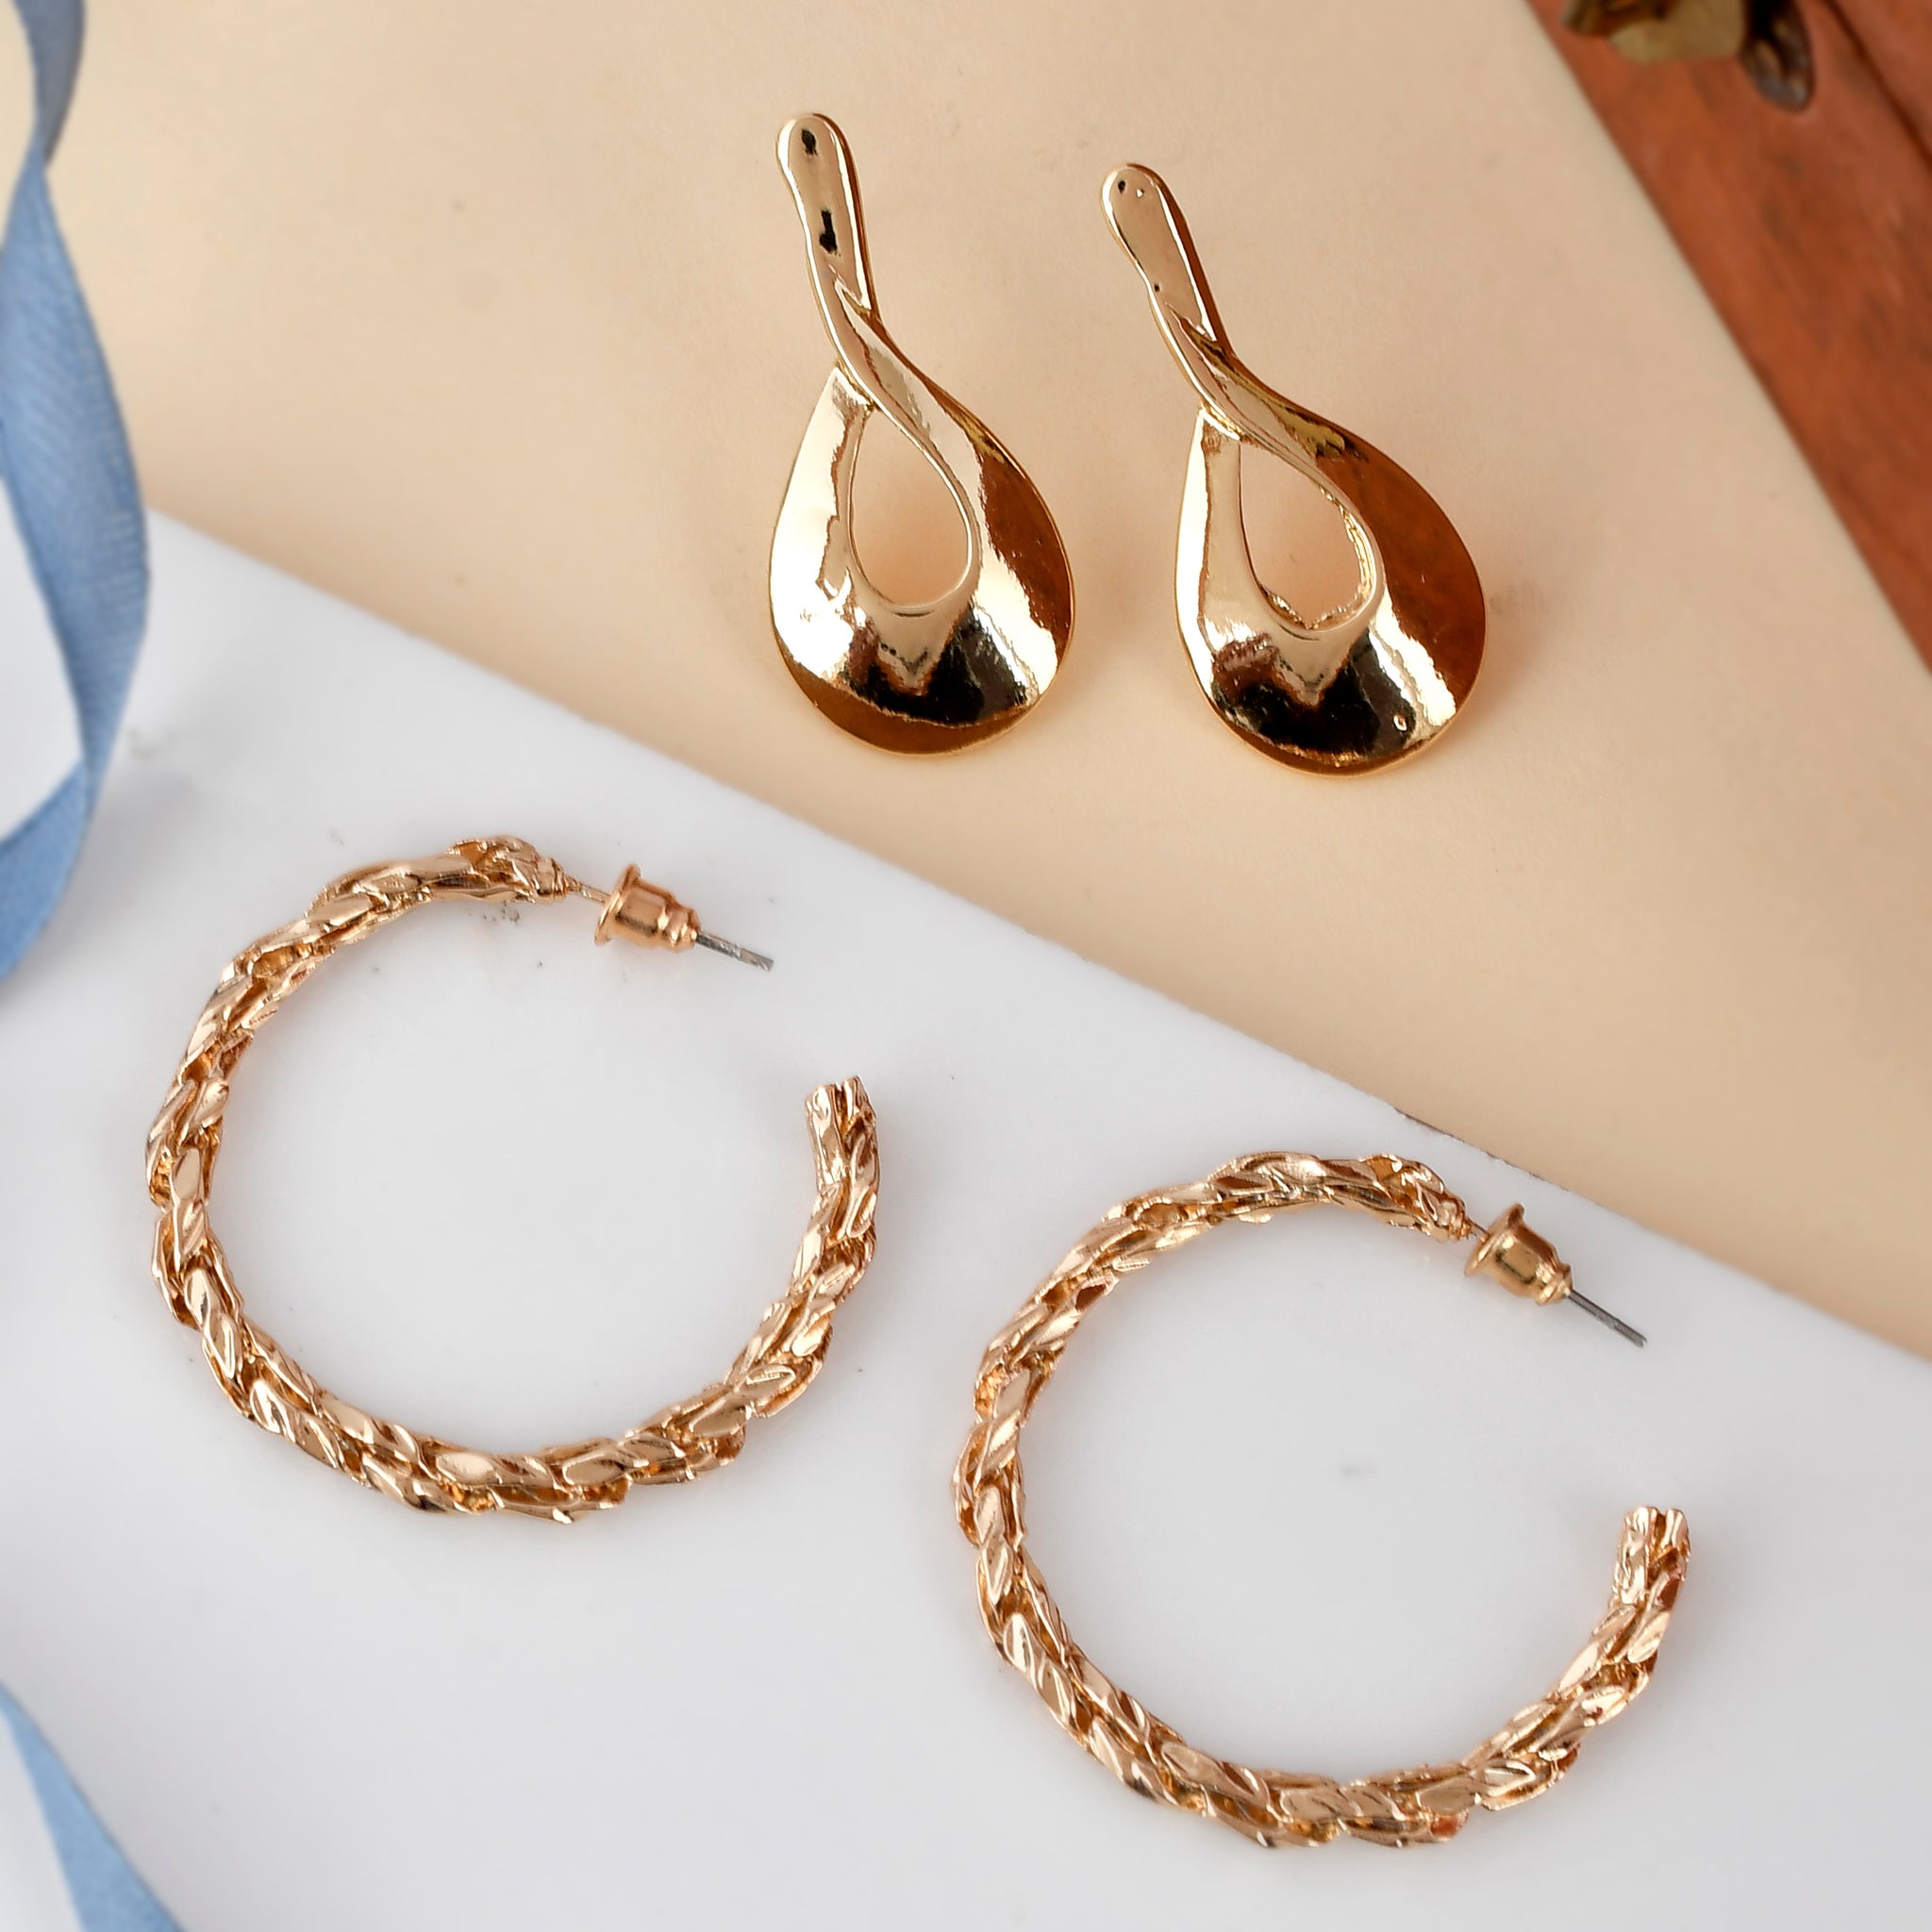 Set of 2 Gold-Plated Contemporary Hoops